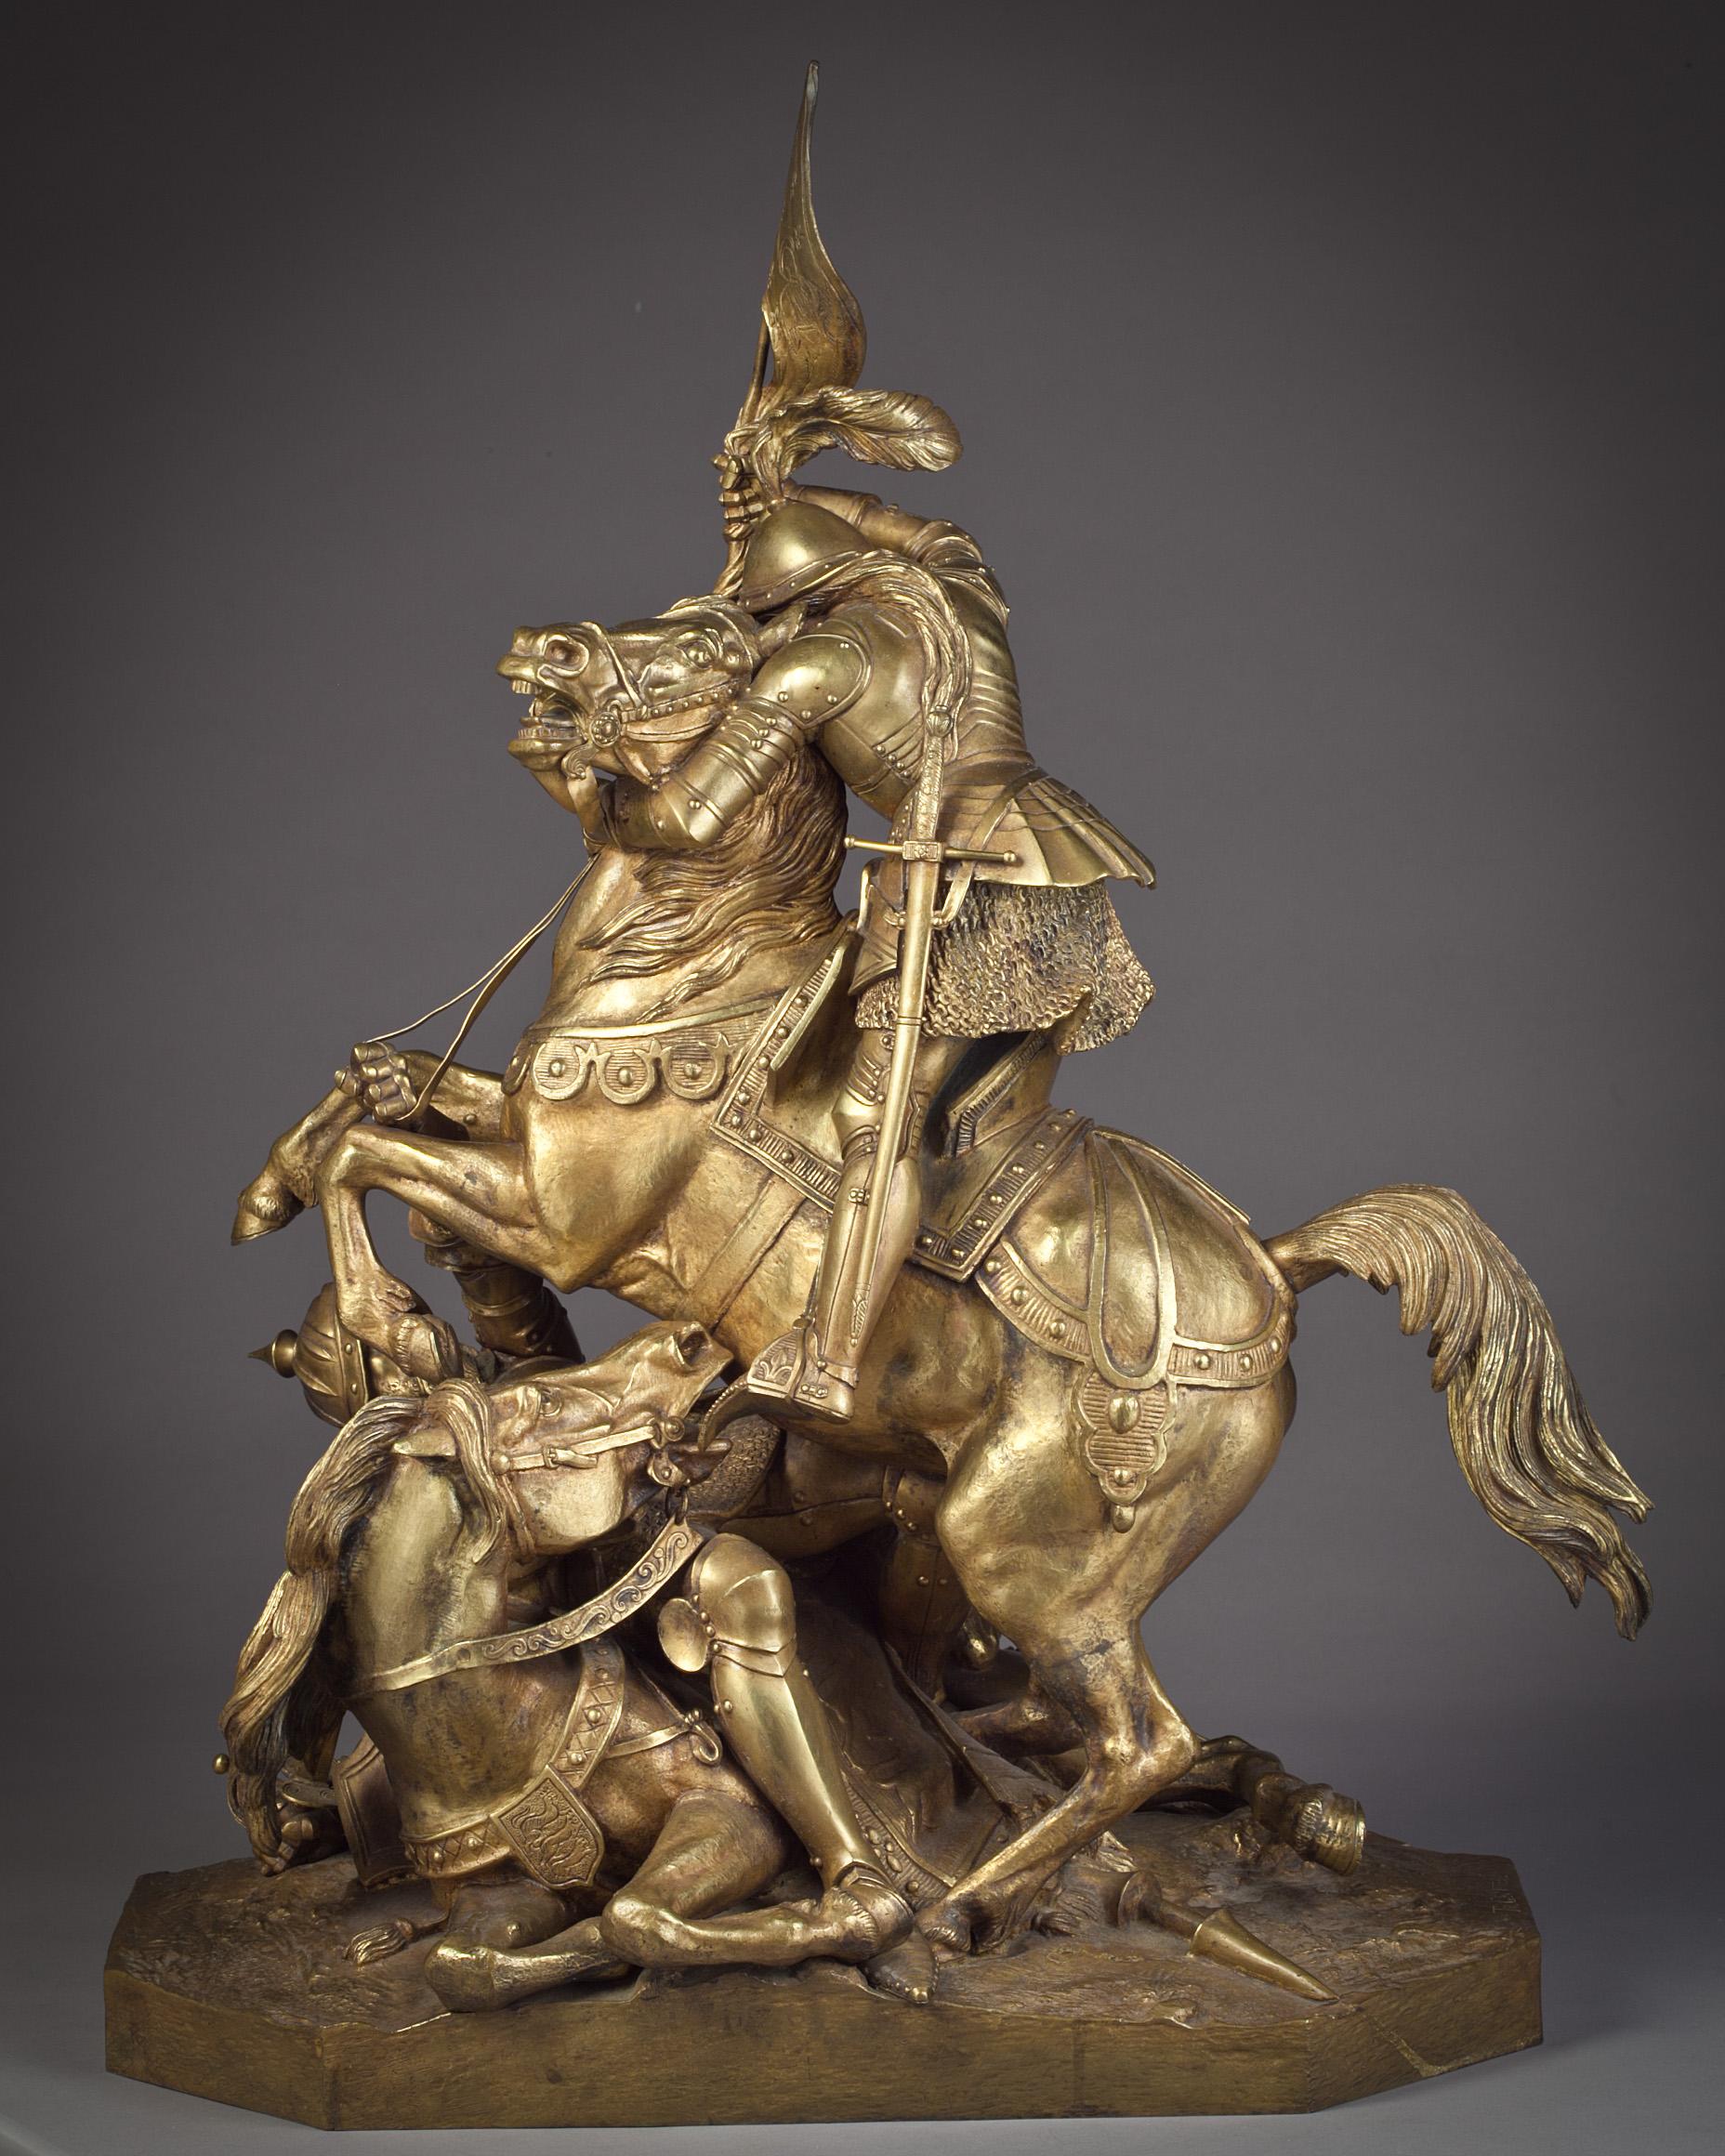 Depicting the armored and mounted Joan rising over a fallen soldier and horse. Signed 'Th. Gechter'.